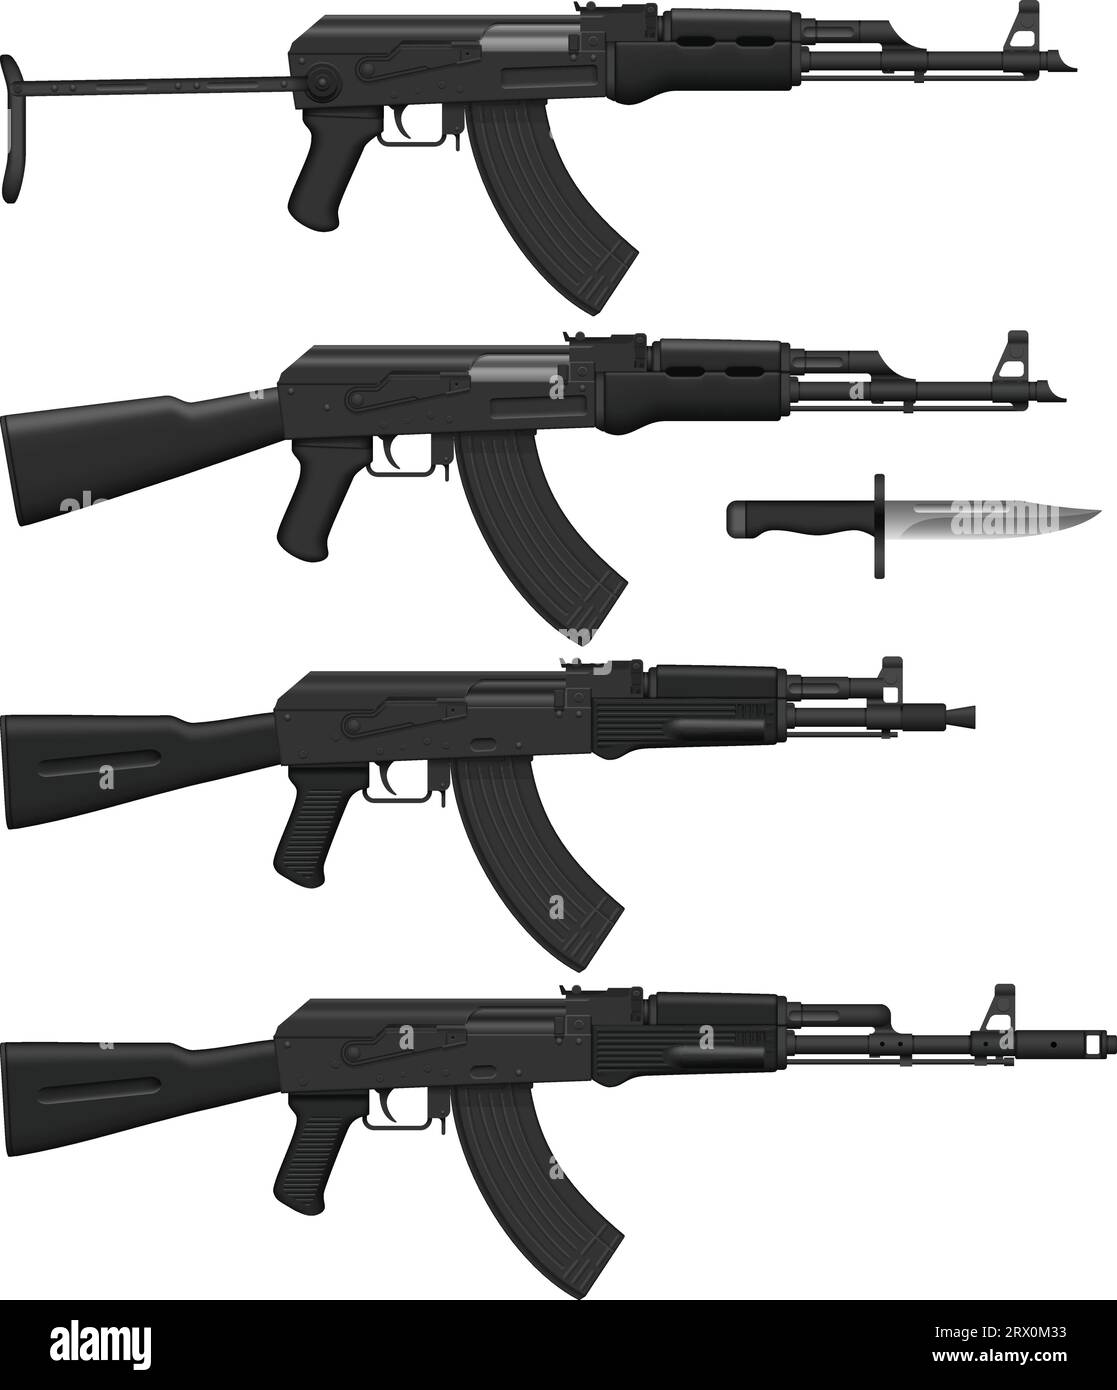 Layered vector illustration of different Assault rifles. Stock Vector